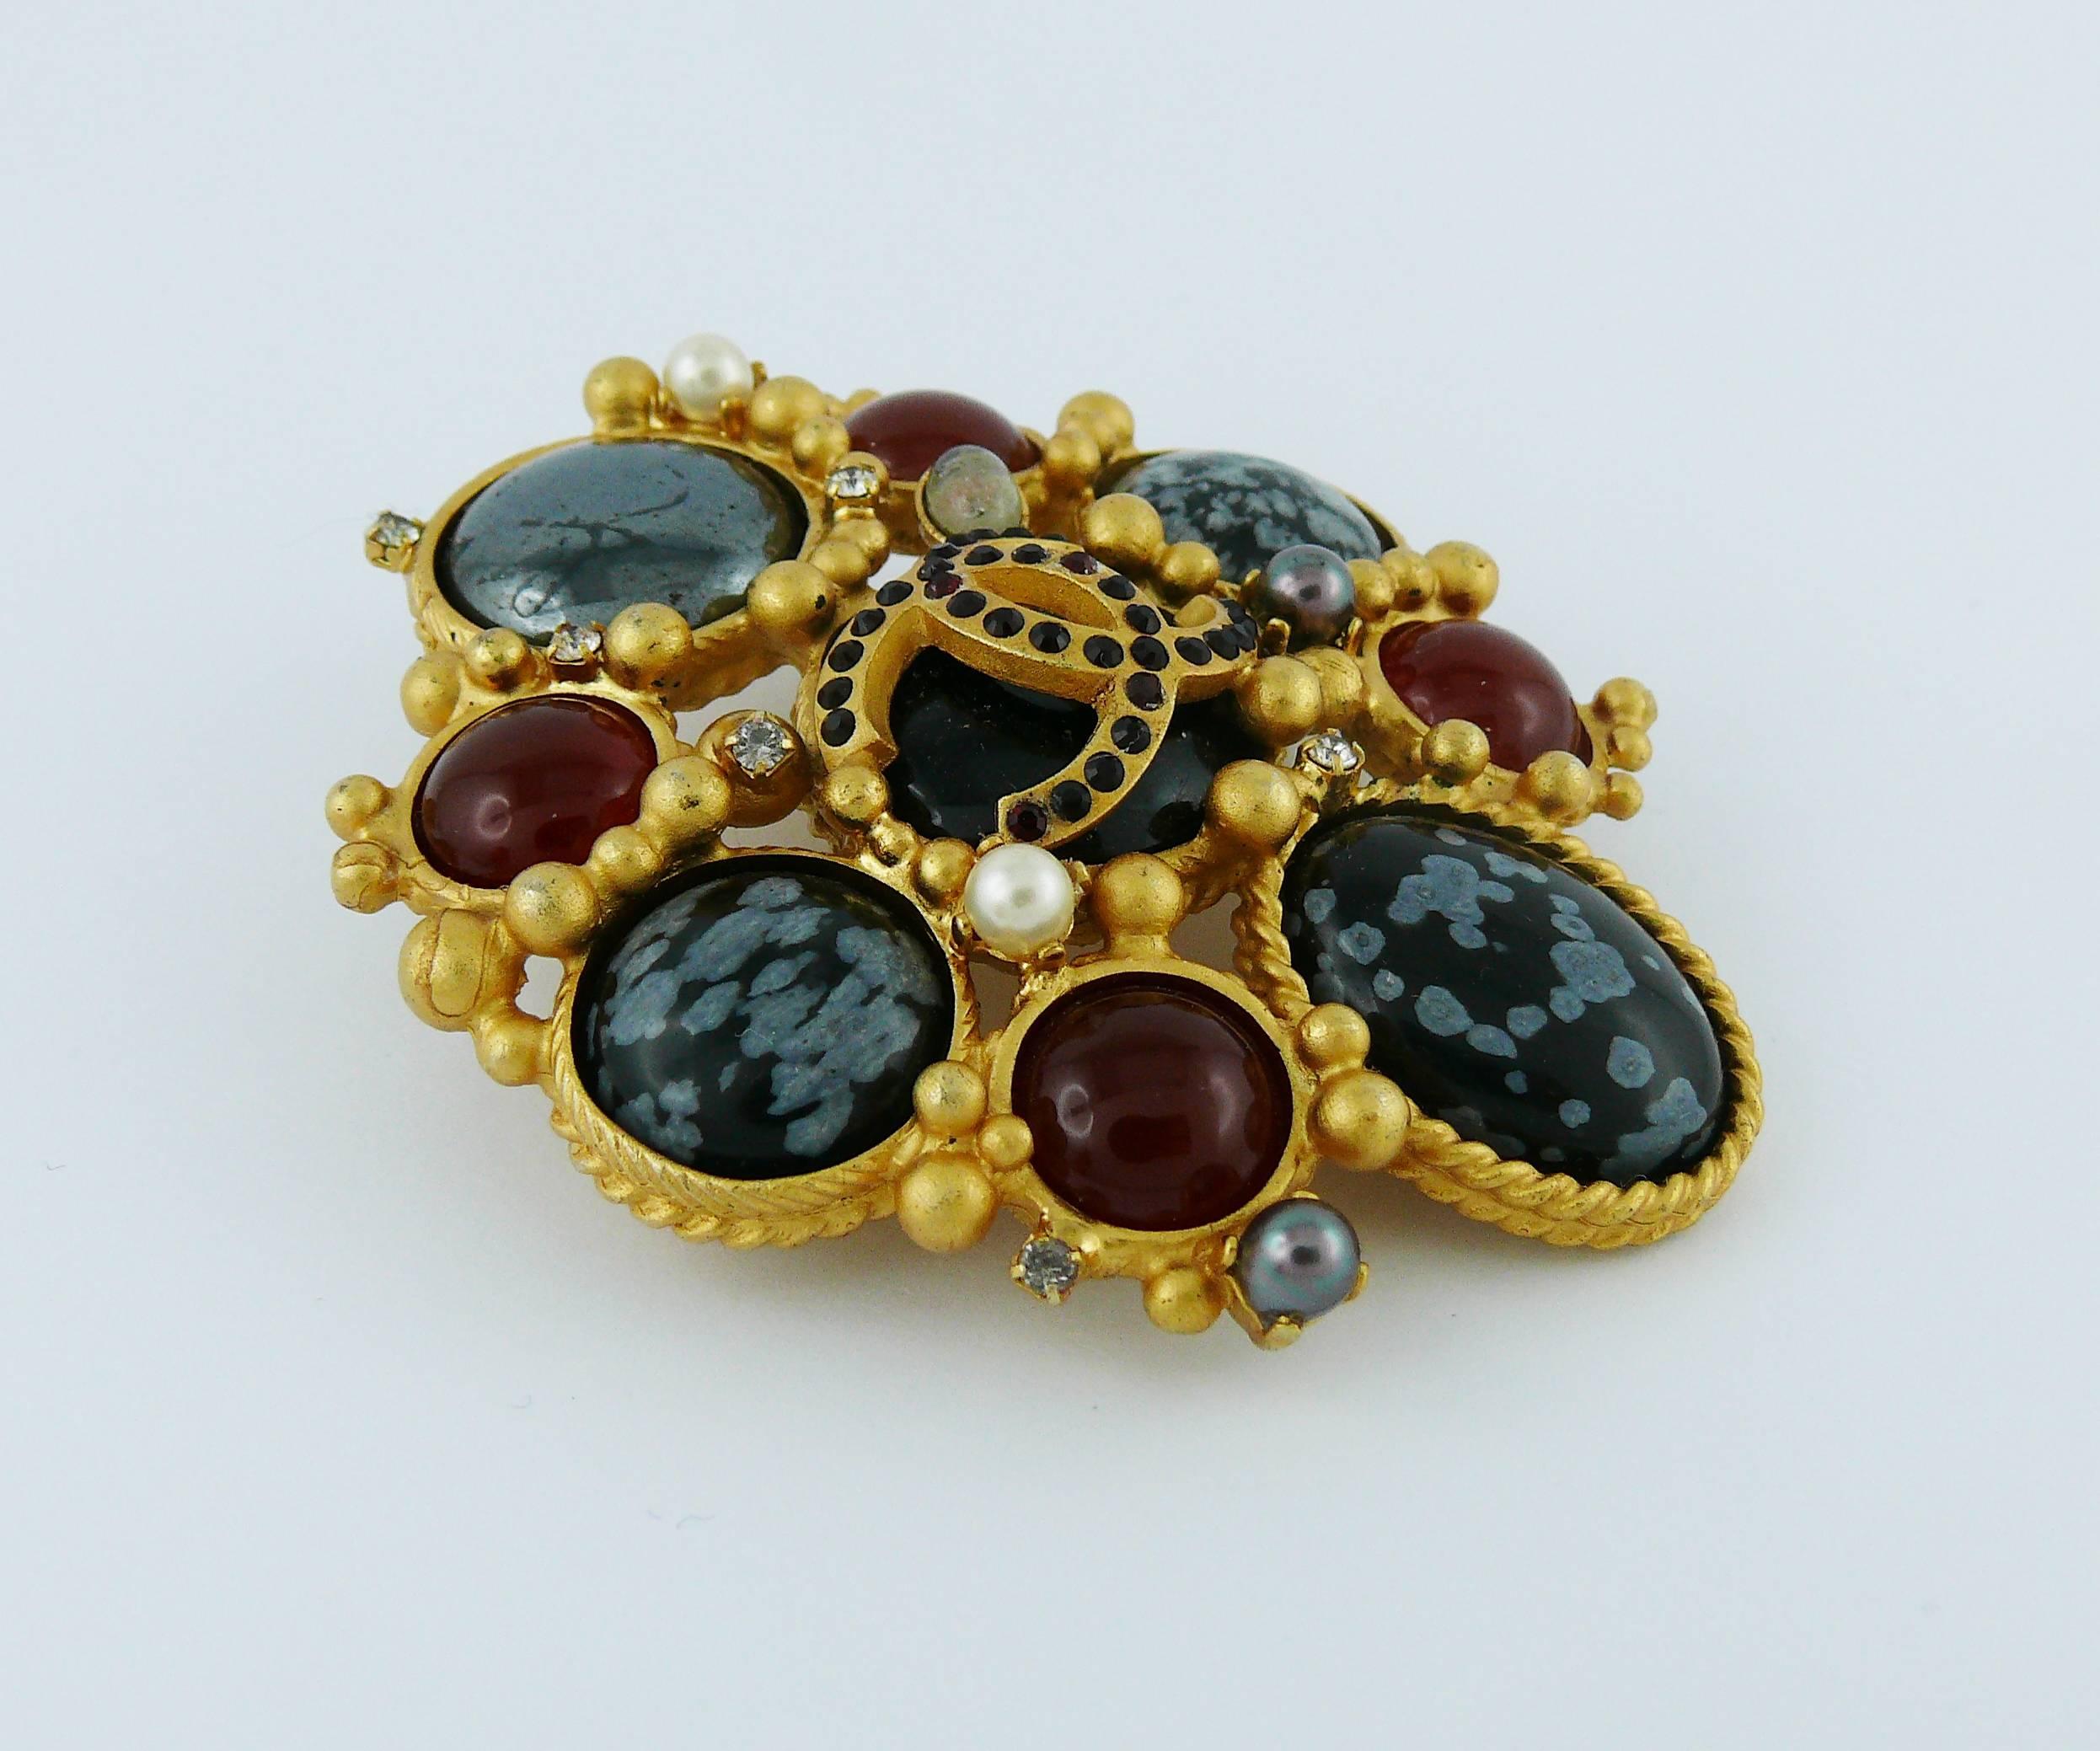 CHANEL gorgeous matte gold tone jewelled Baroque brooch with CC logo featuring glass cabochons, faux pearls, clear and ruby crystals.

Fall/Winter collection 2001.

Marked CHANEL 01 A Made in France.
Engraved "S" for private sale